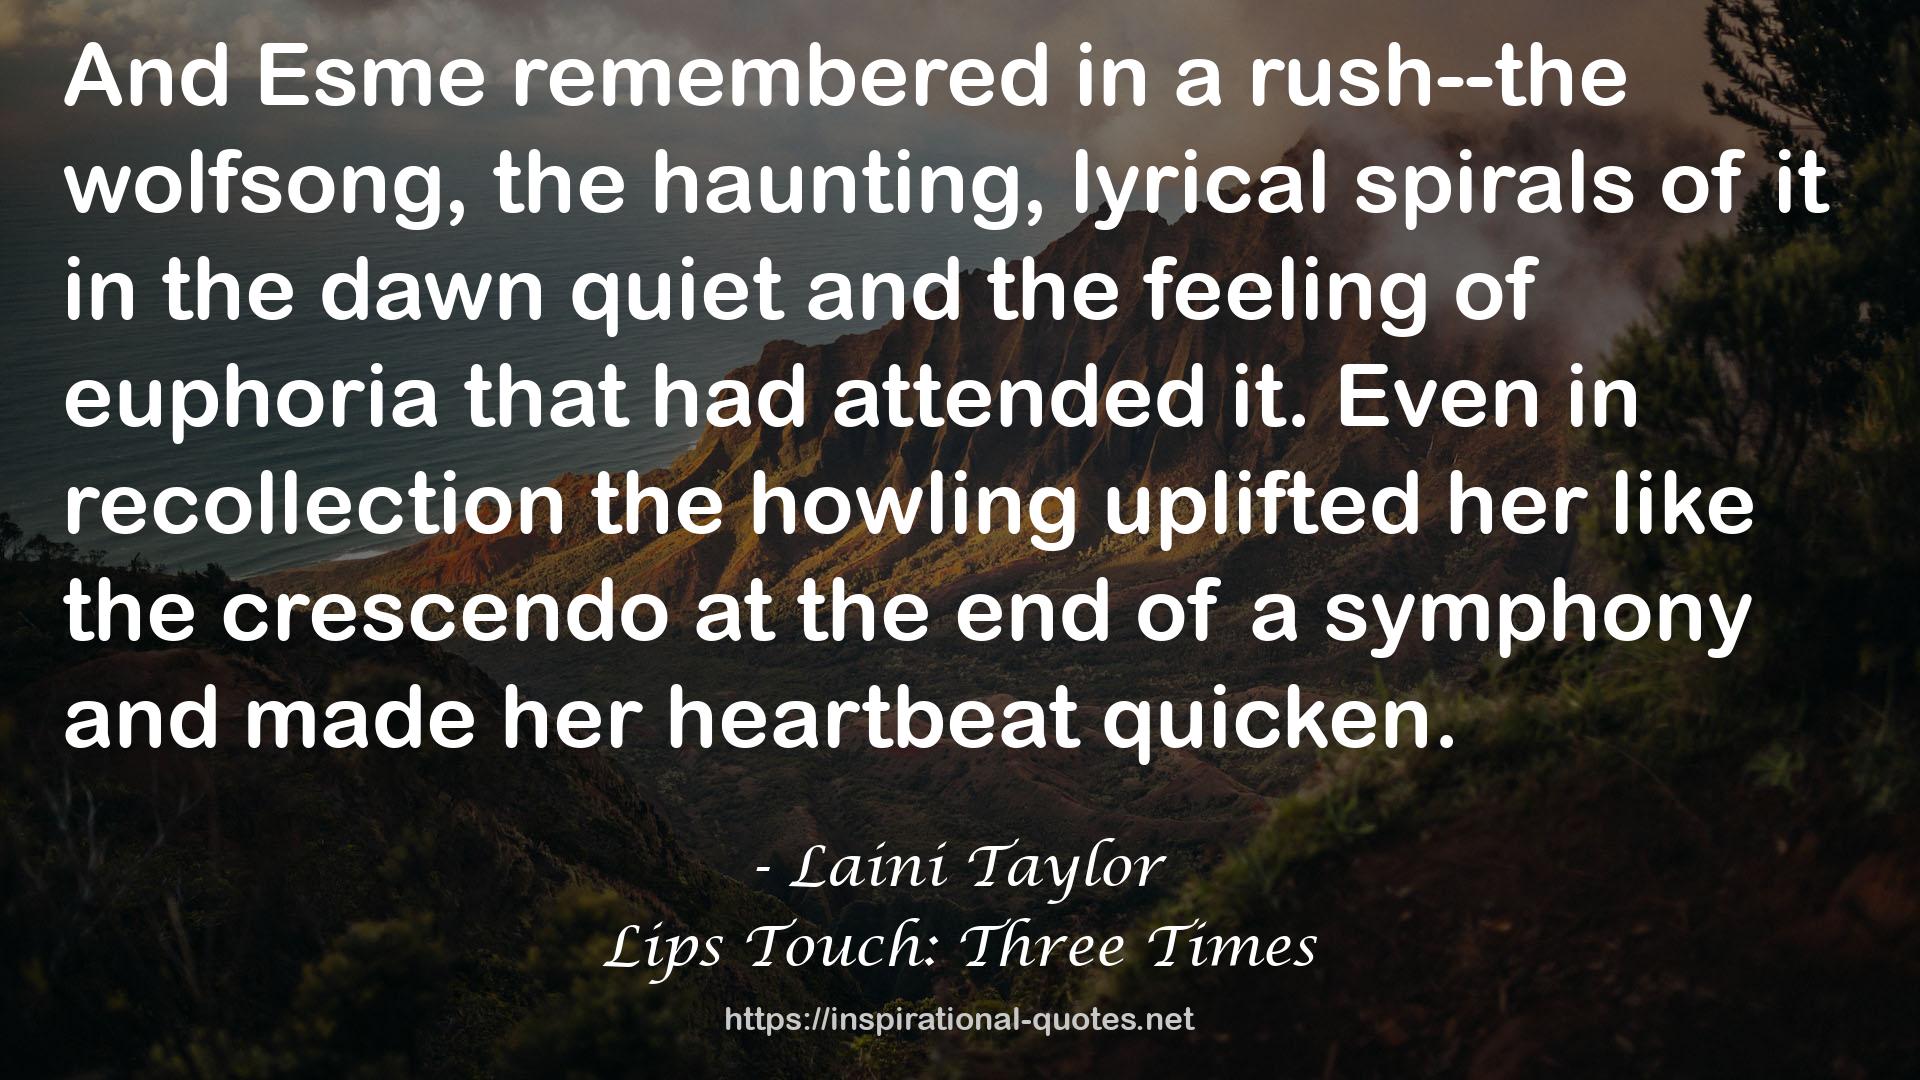 Lips Touch: Three Times QUOTES